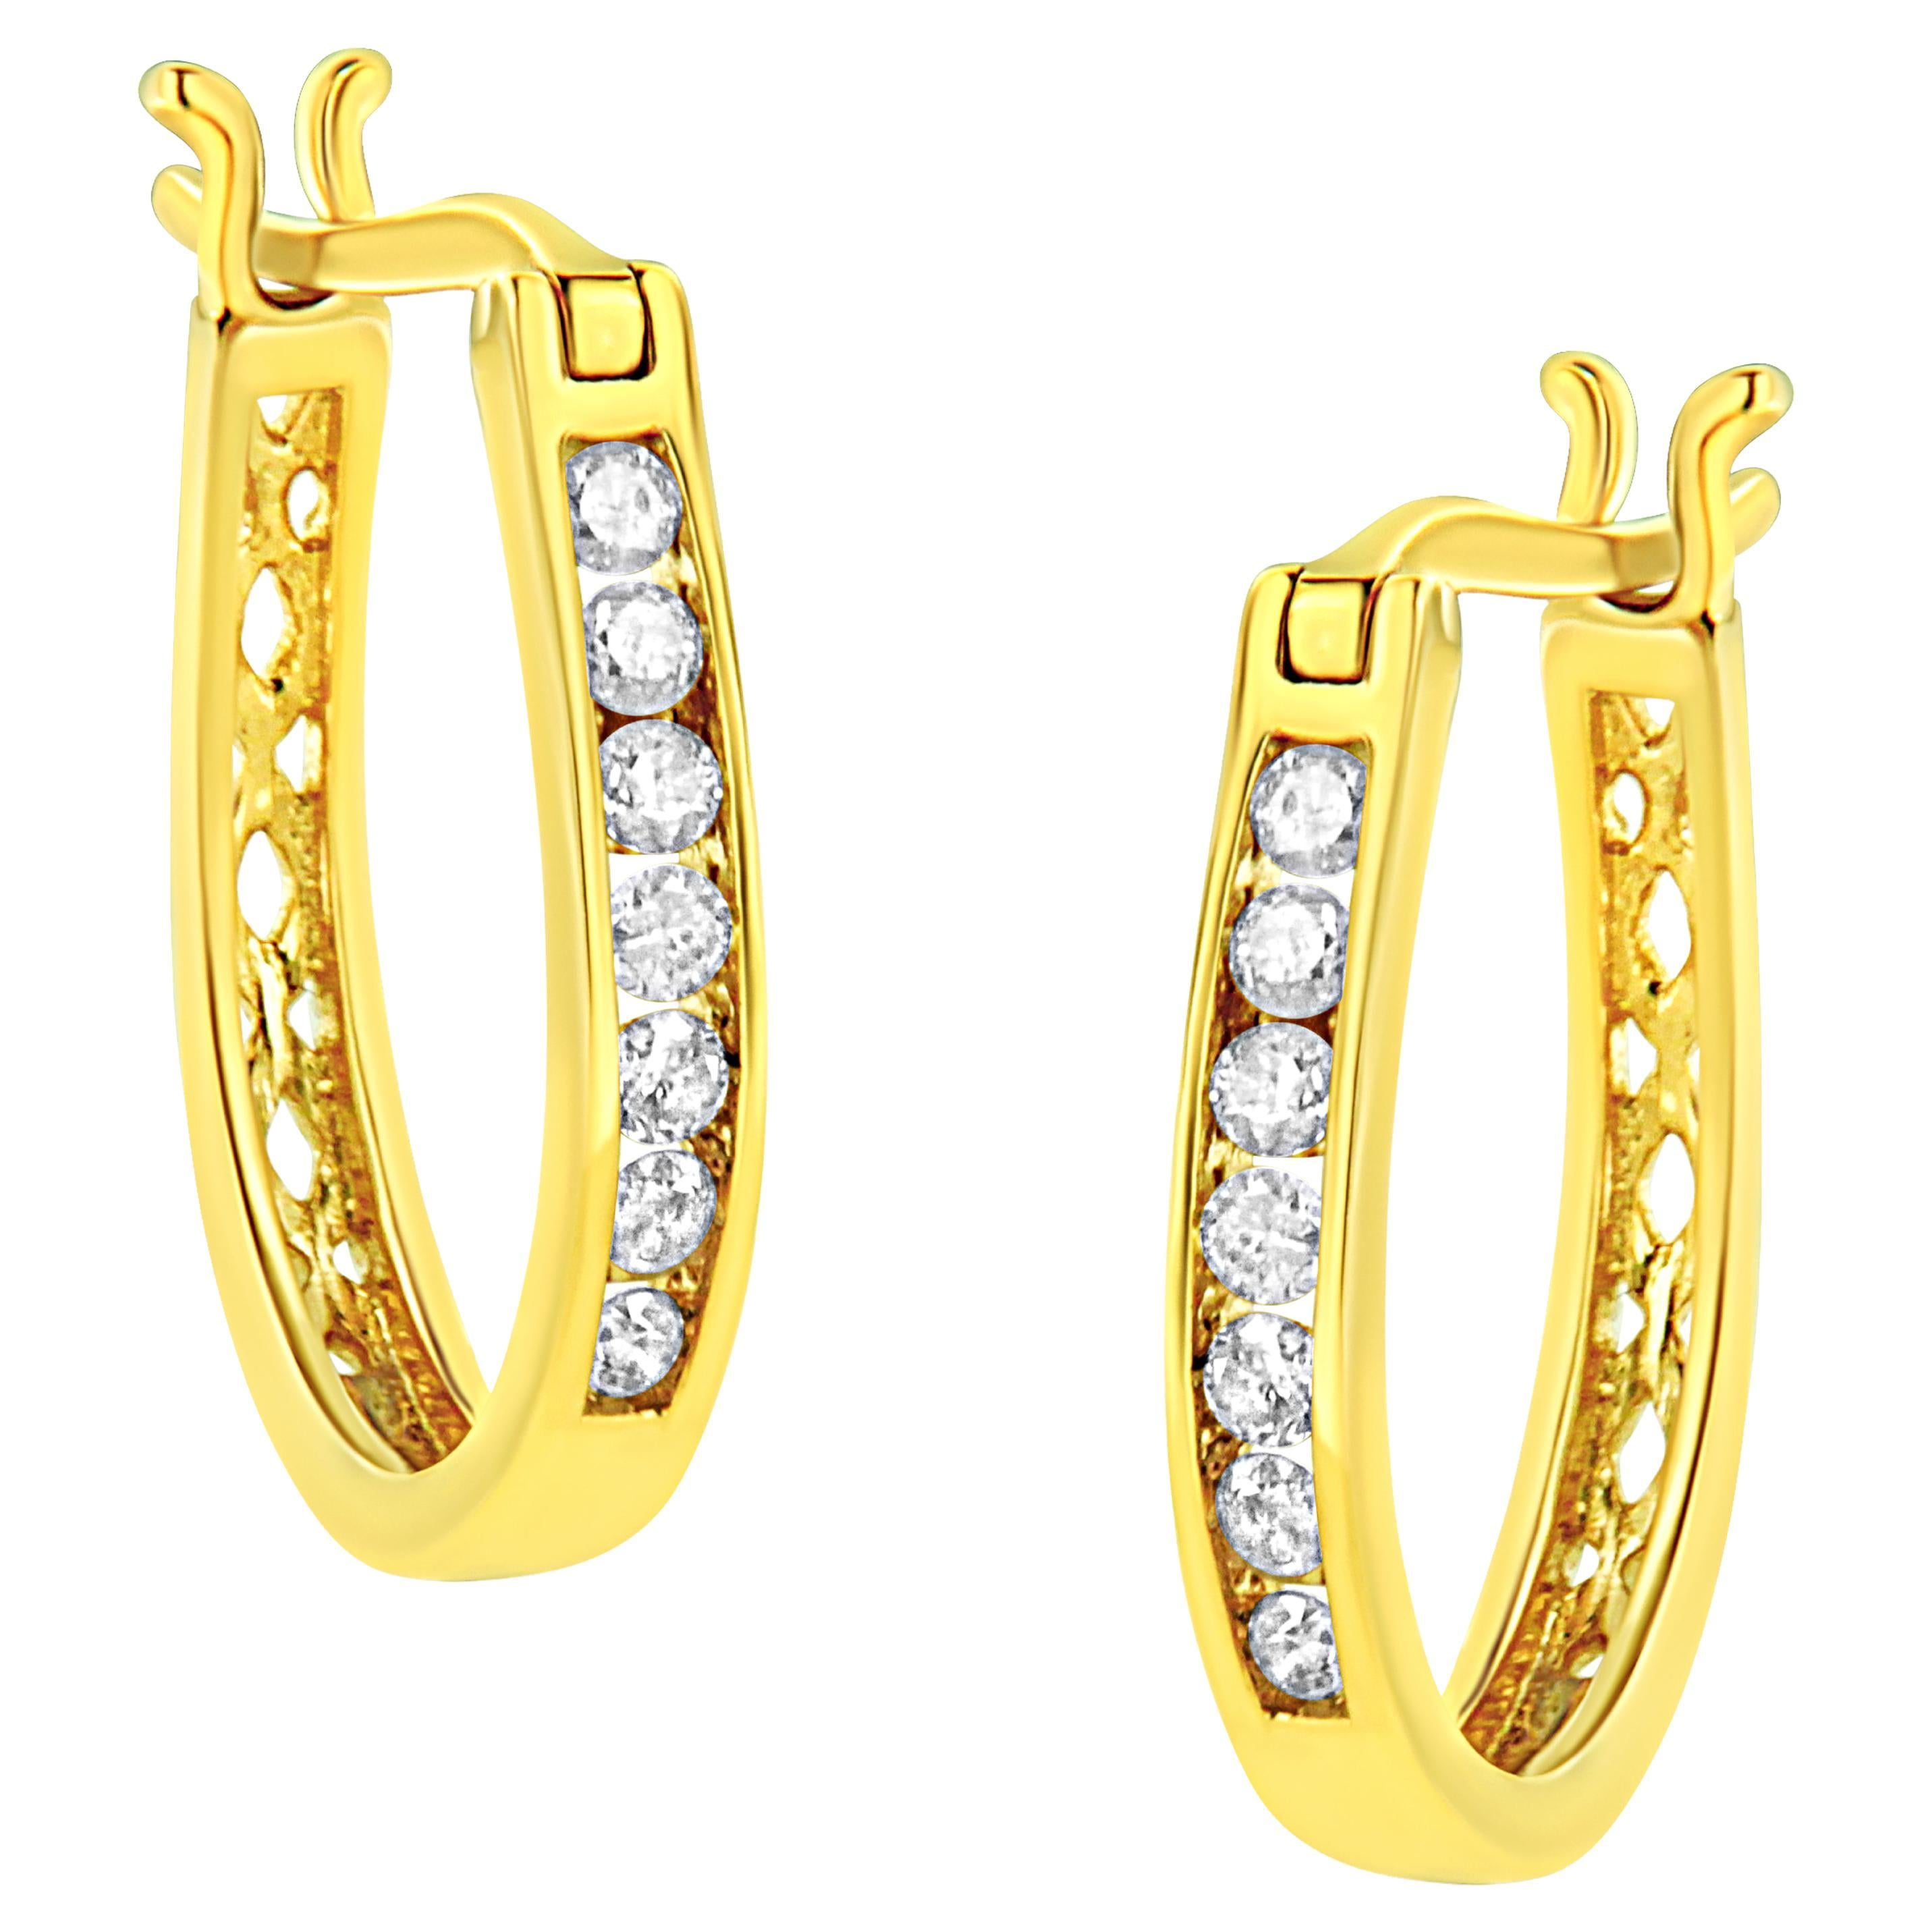 Yellow Gold Plated Sterling Silver 1/4 Carat Diamond Leverback Hoop Earrings